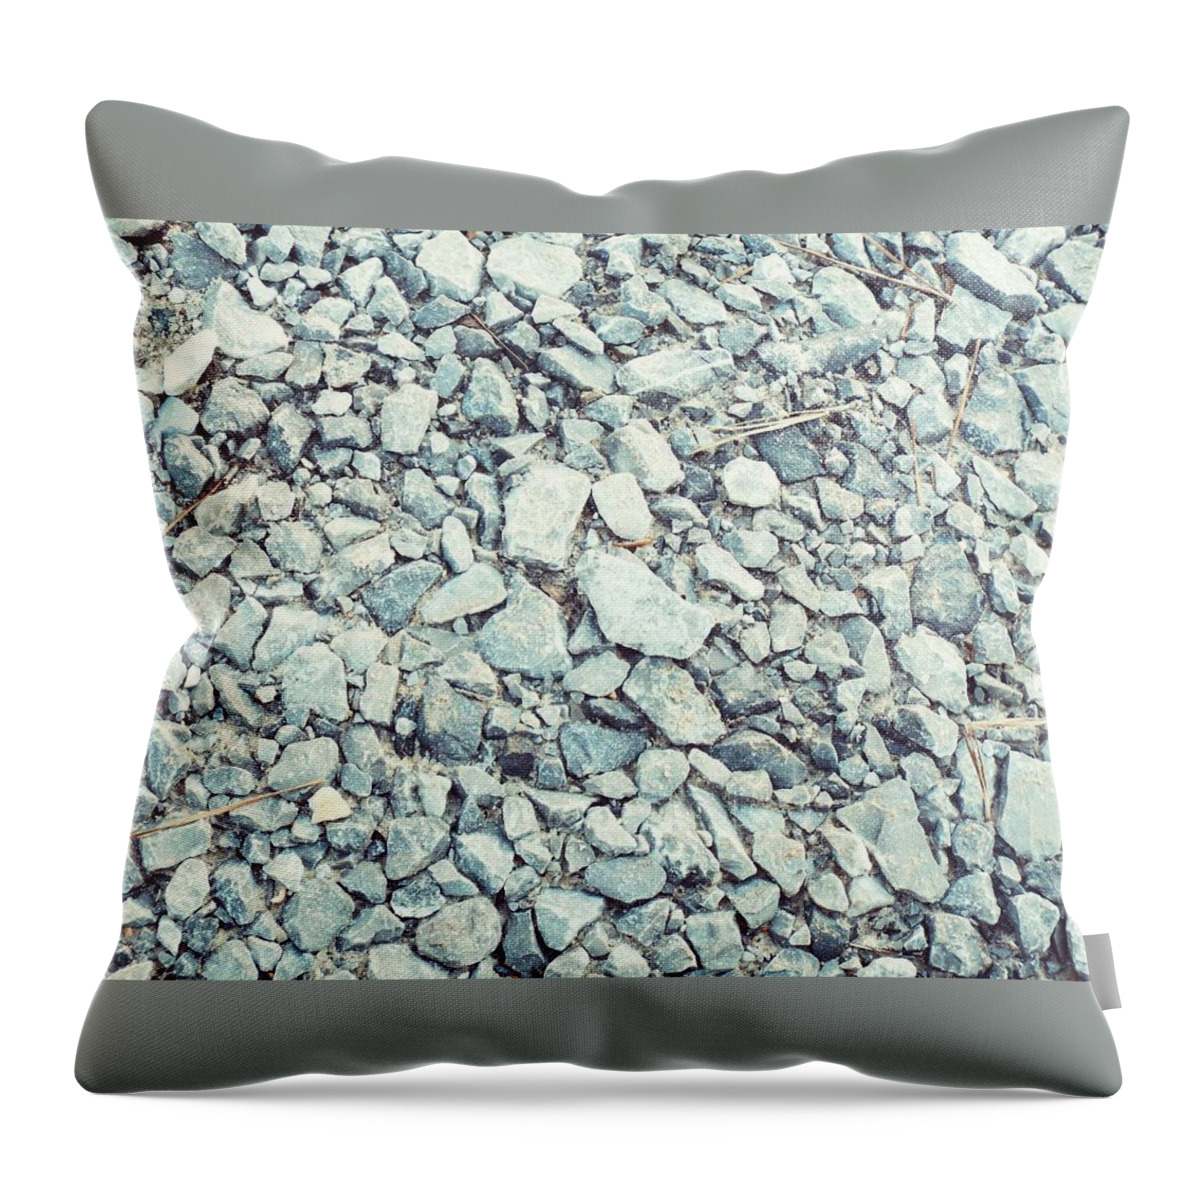 Gravel. Outdoors. Rocks. Dirt. Stones. Grey. Construction. Throw Pillow featuring the photograph Gravel by Shelby Boyle